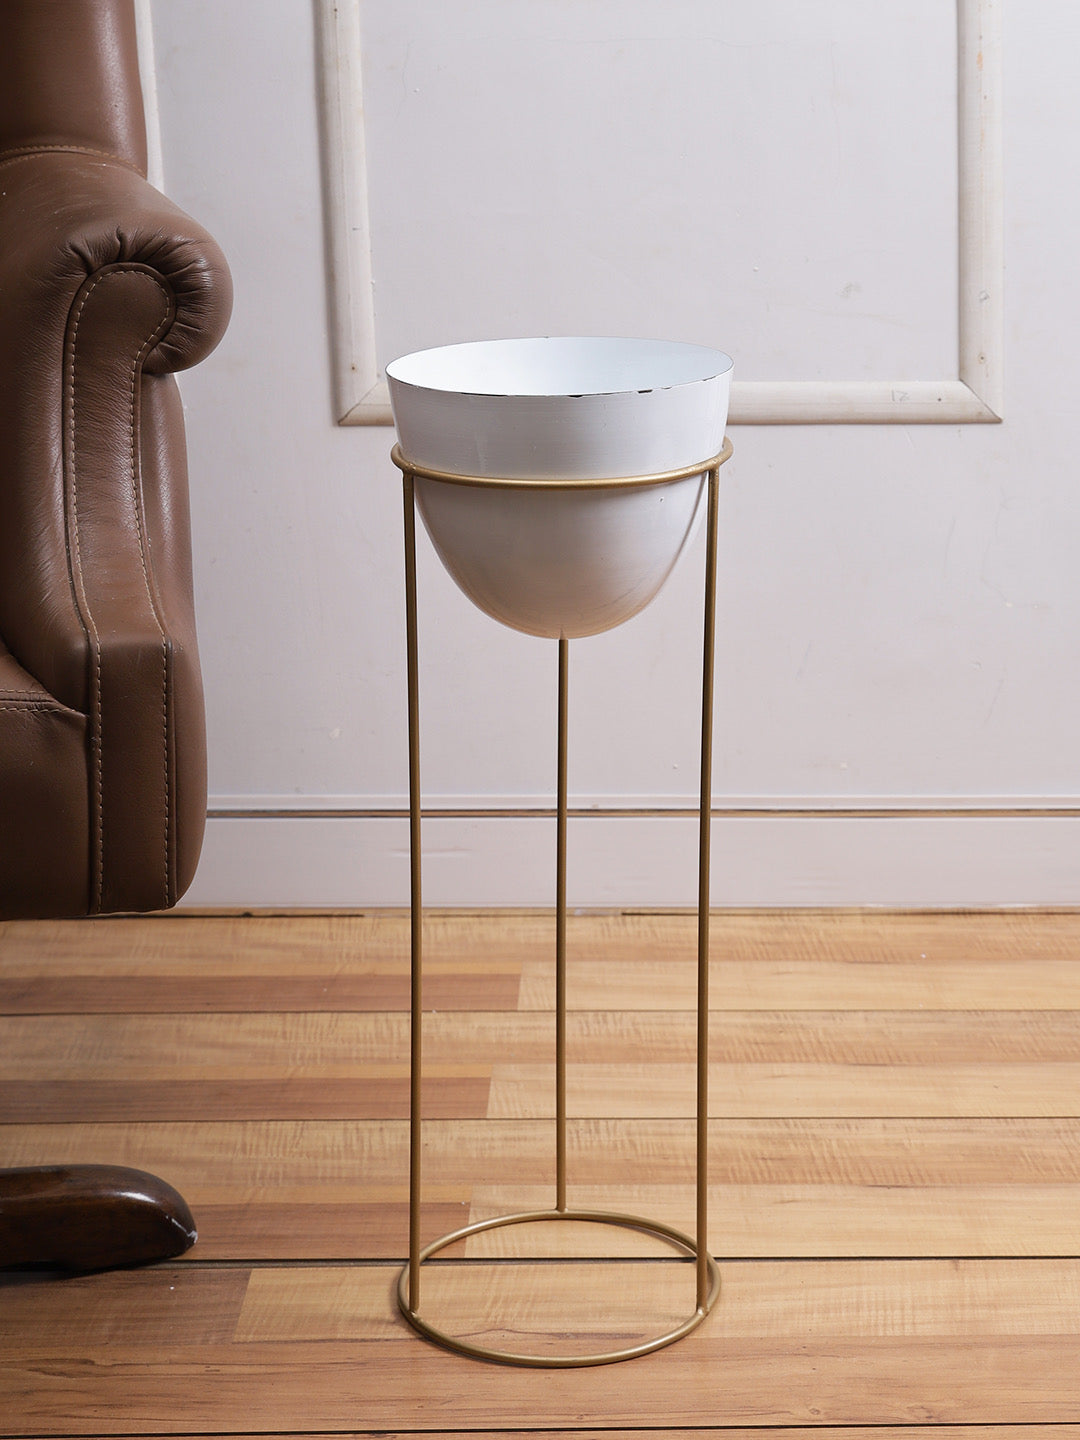 White Planter with Golden Stand - Default Title (CHM2123BIG)